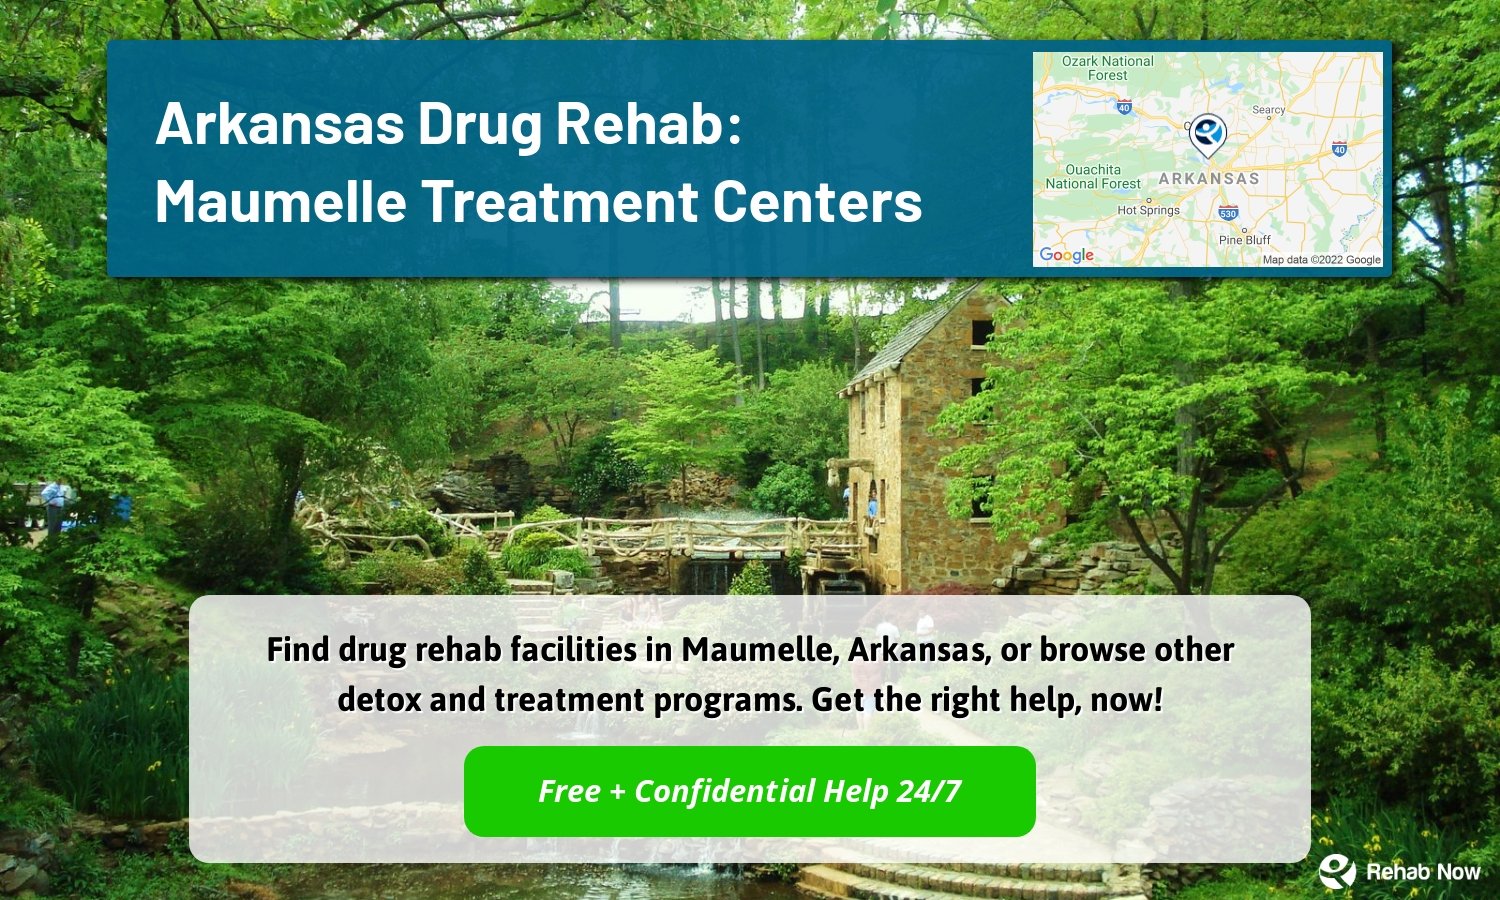 Find drug rehab facilities in Maumelle, Arkansas, or browse other detox and treatment programs. Get the right help, now!